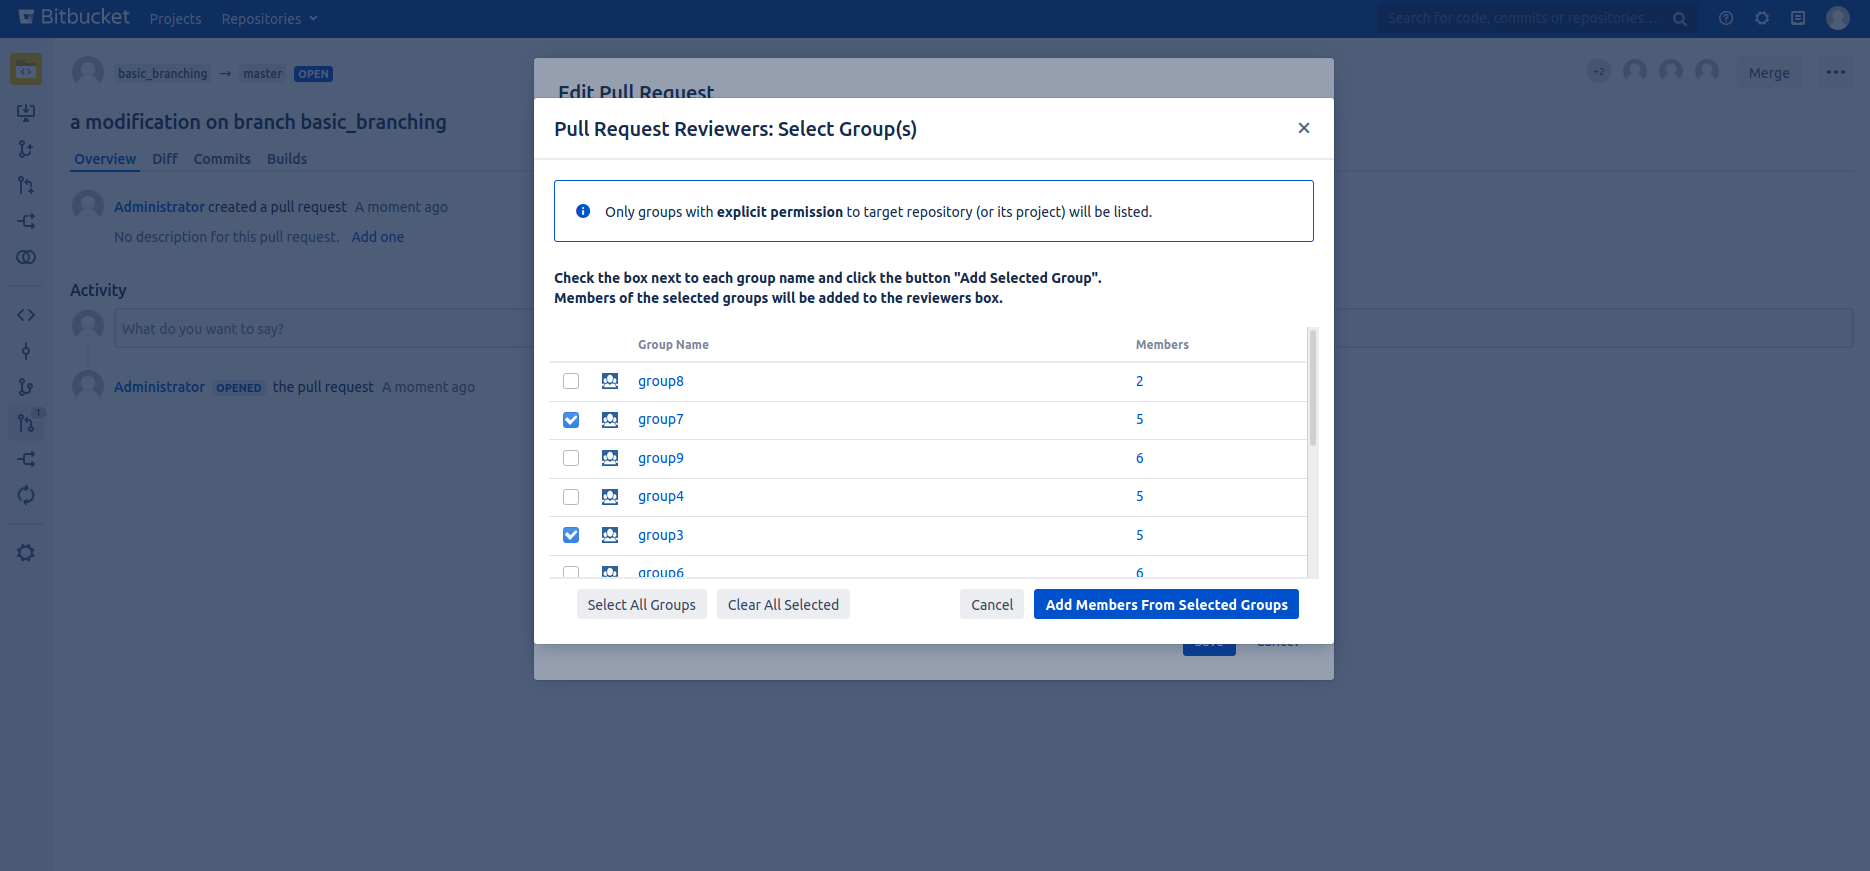 Select Group Dialog Example 2